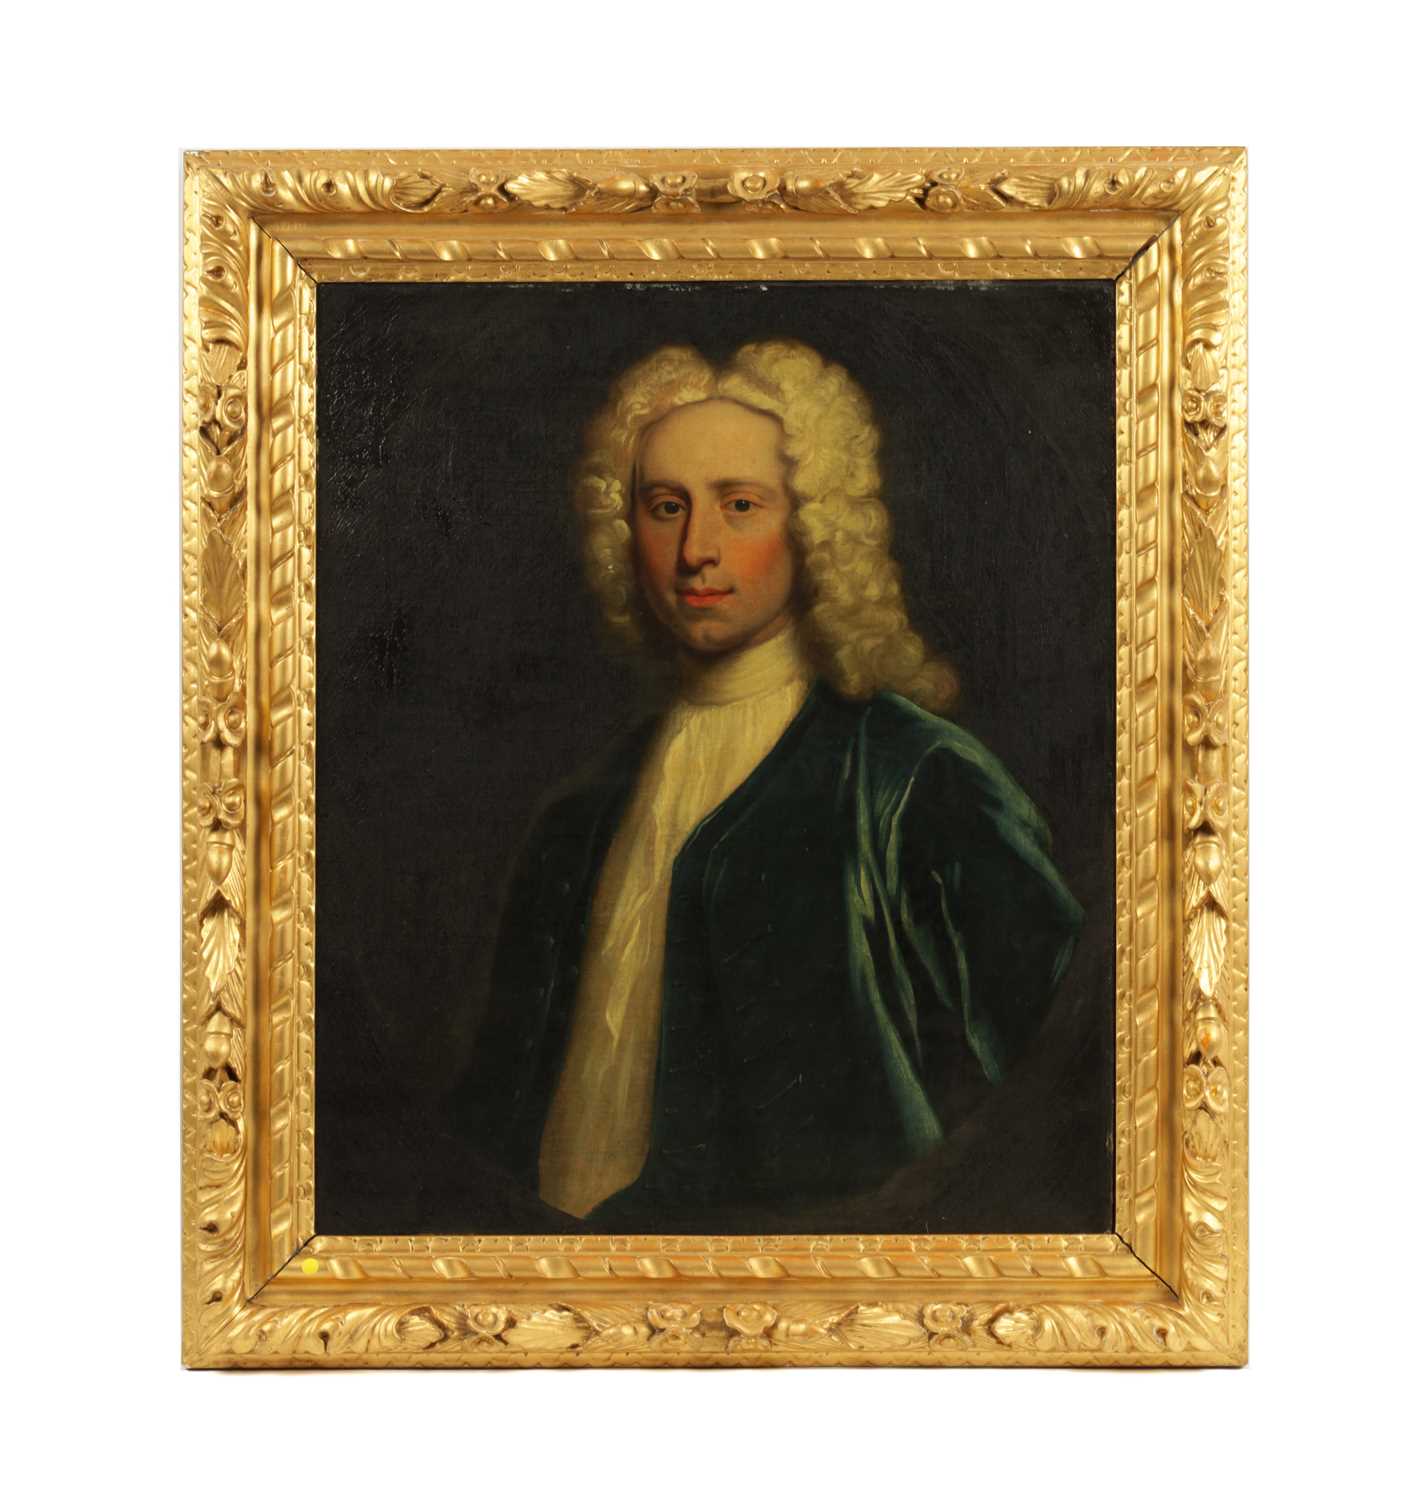 Lot 430 - AN EARLY 18TH CENTURY PORTRAIT - OIL ON CANVAS